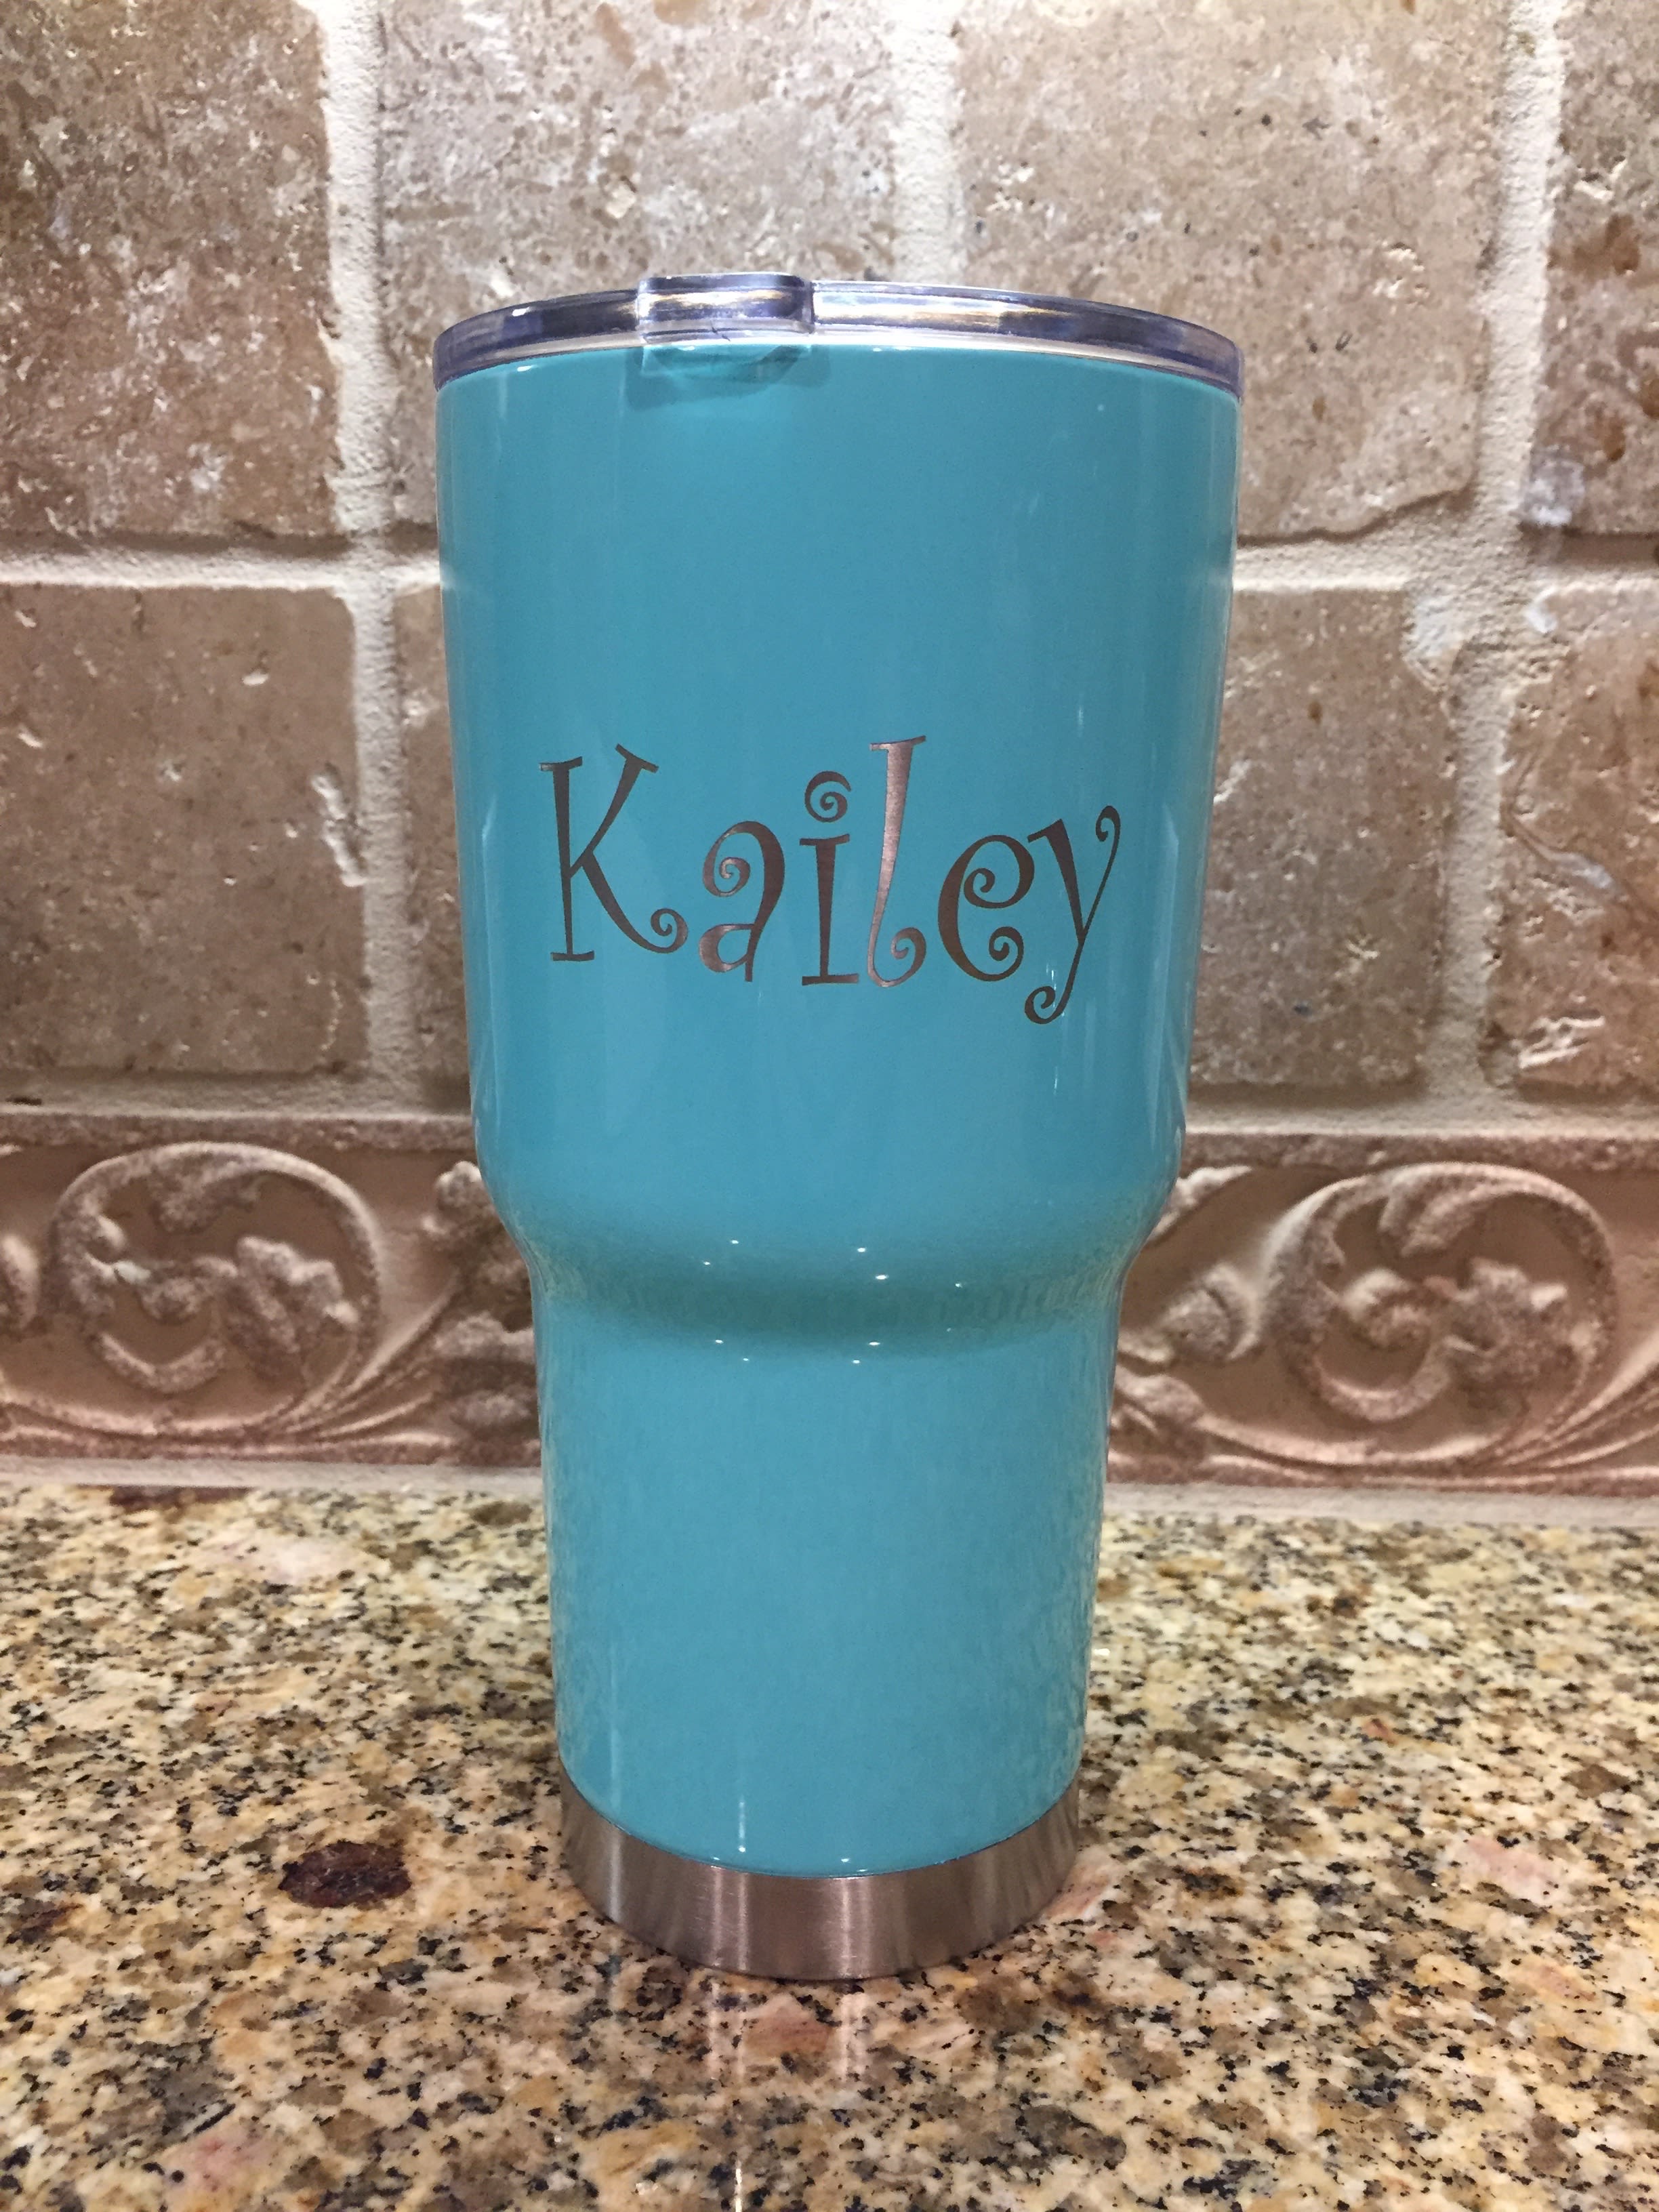 40 Oz. RTIC TUMBLER Personalized With Laser Engraved Name Phrase or Custom  Design Available in Black, Navy, or Graphite 